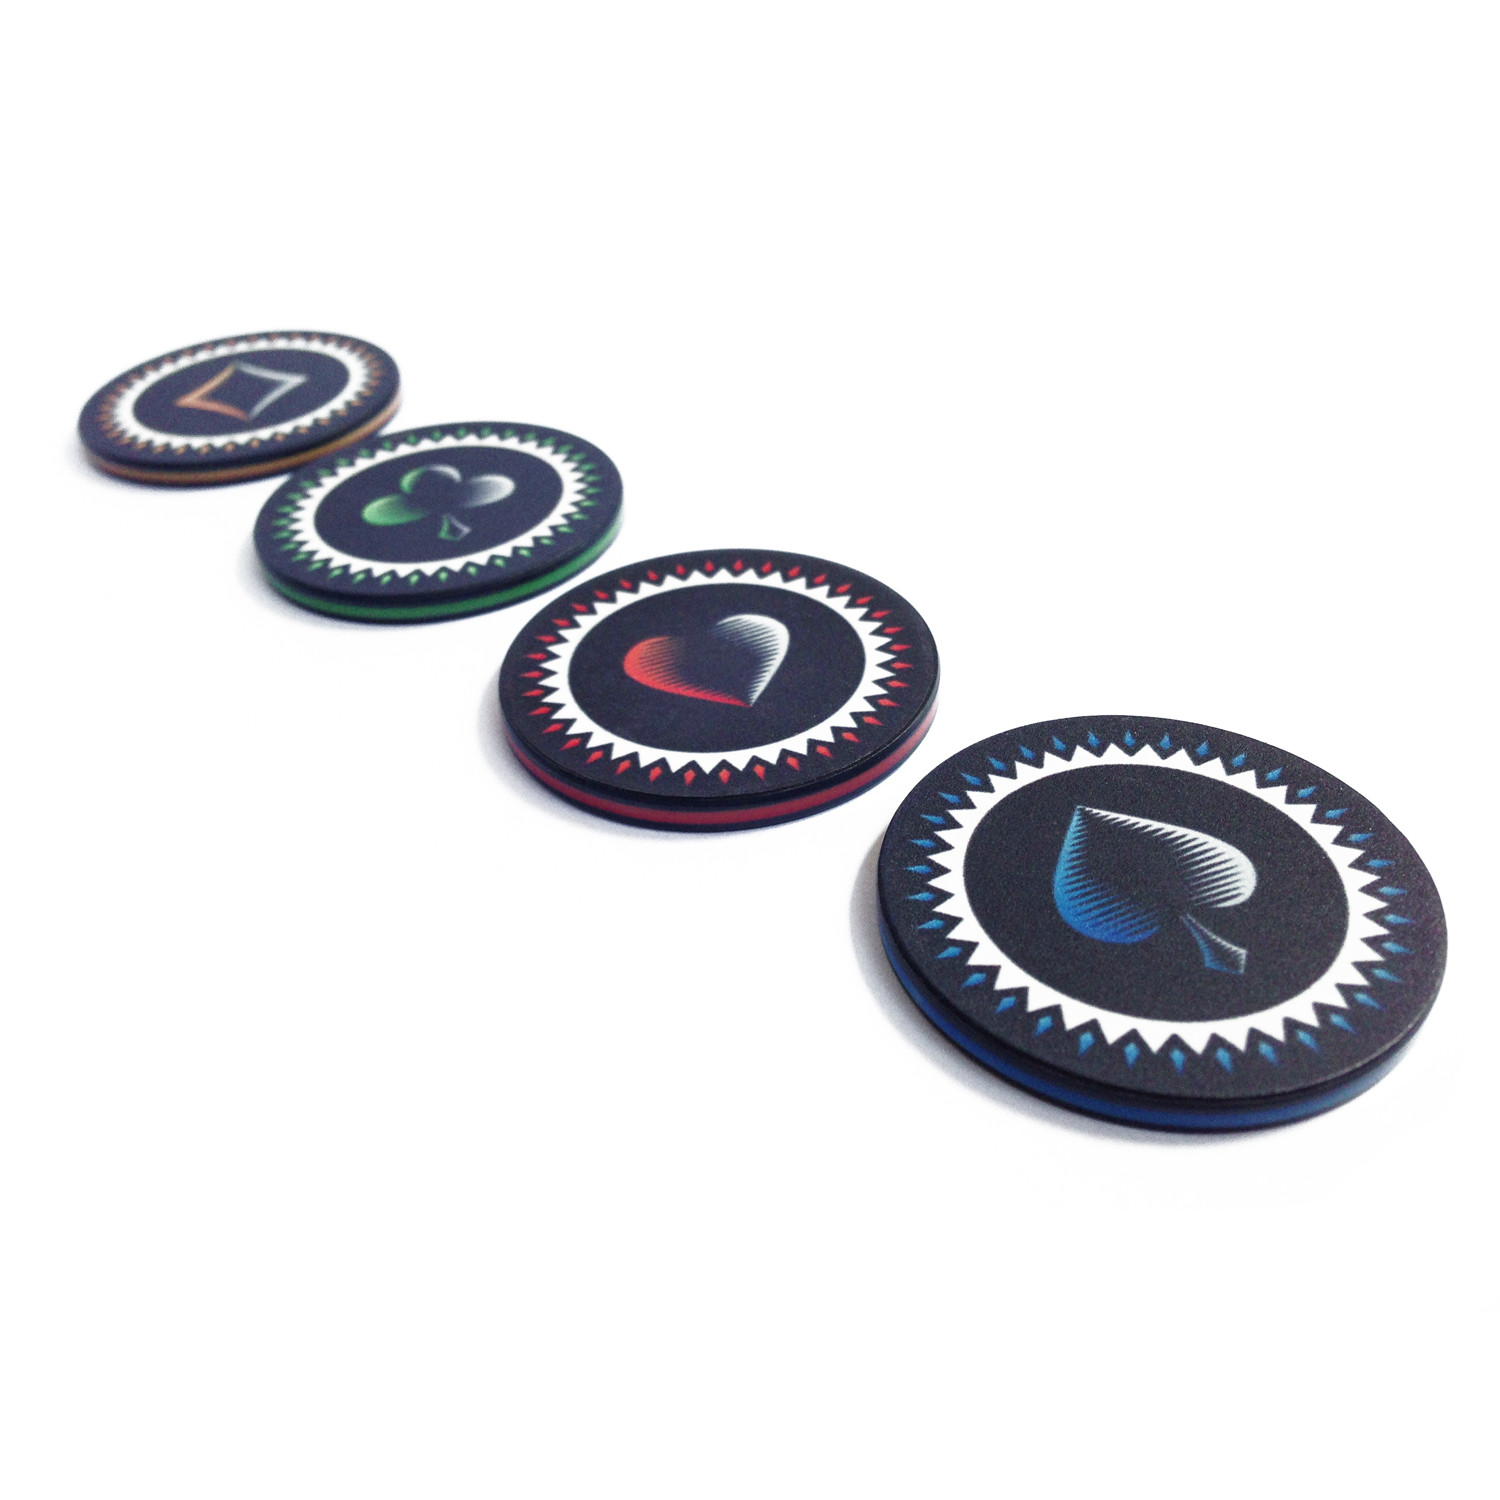 Eclipse Poker Chips